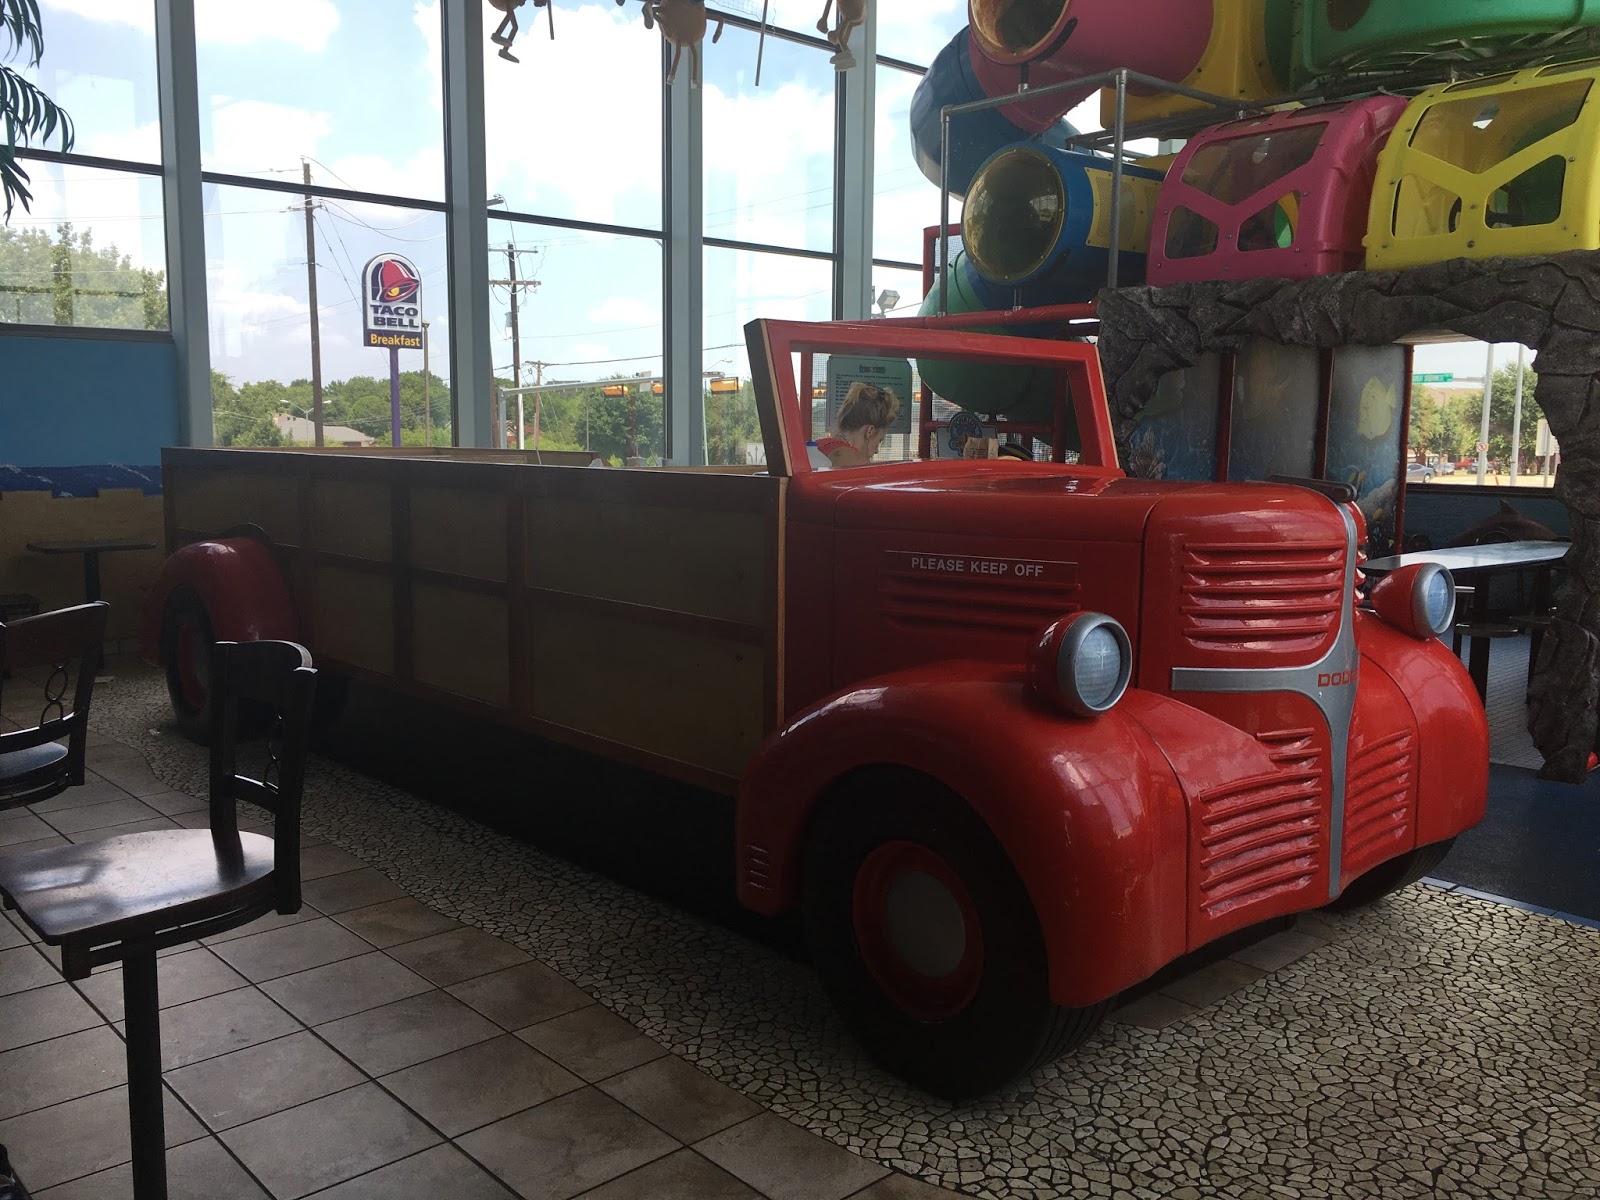 Everything Arlington, TX!: The Best Fast Food Play Areas ...